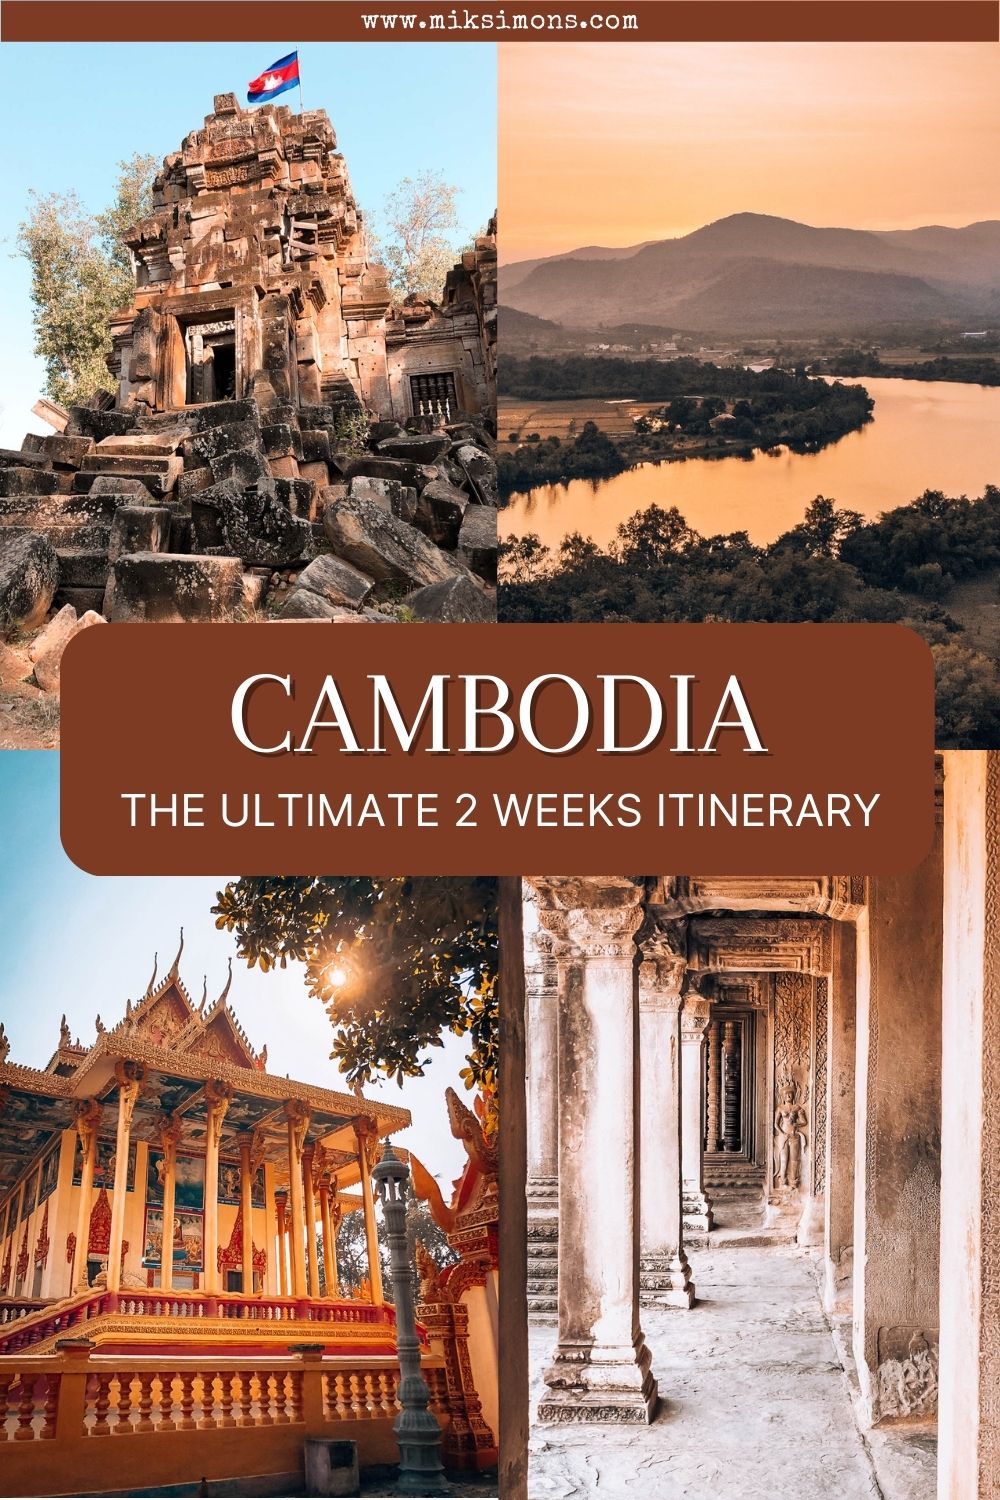 Cambodia in 2 weeks itinerary1